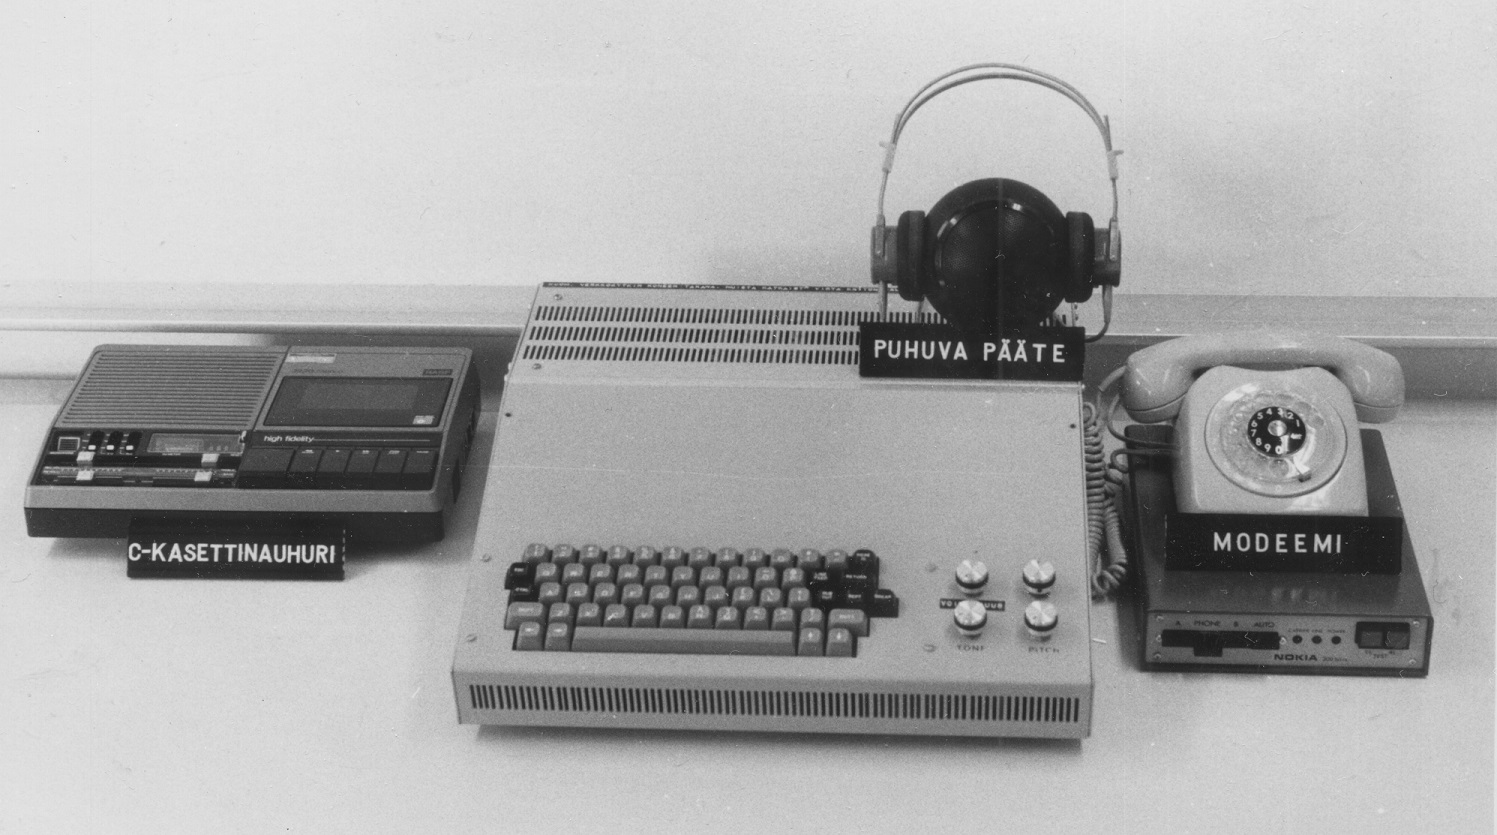 Black and White photo of old computer equipment